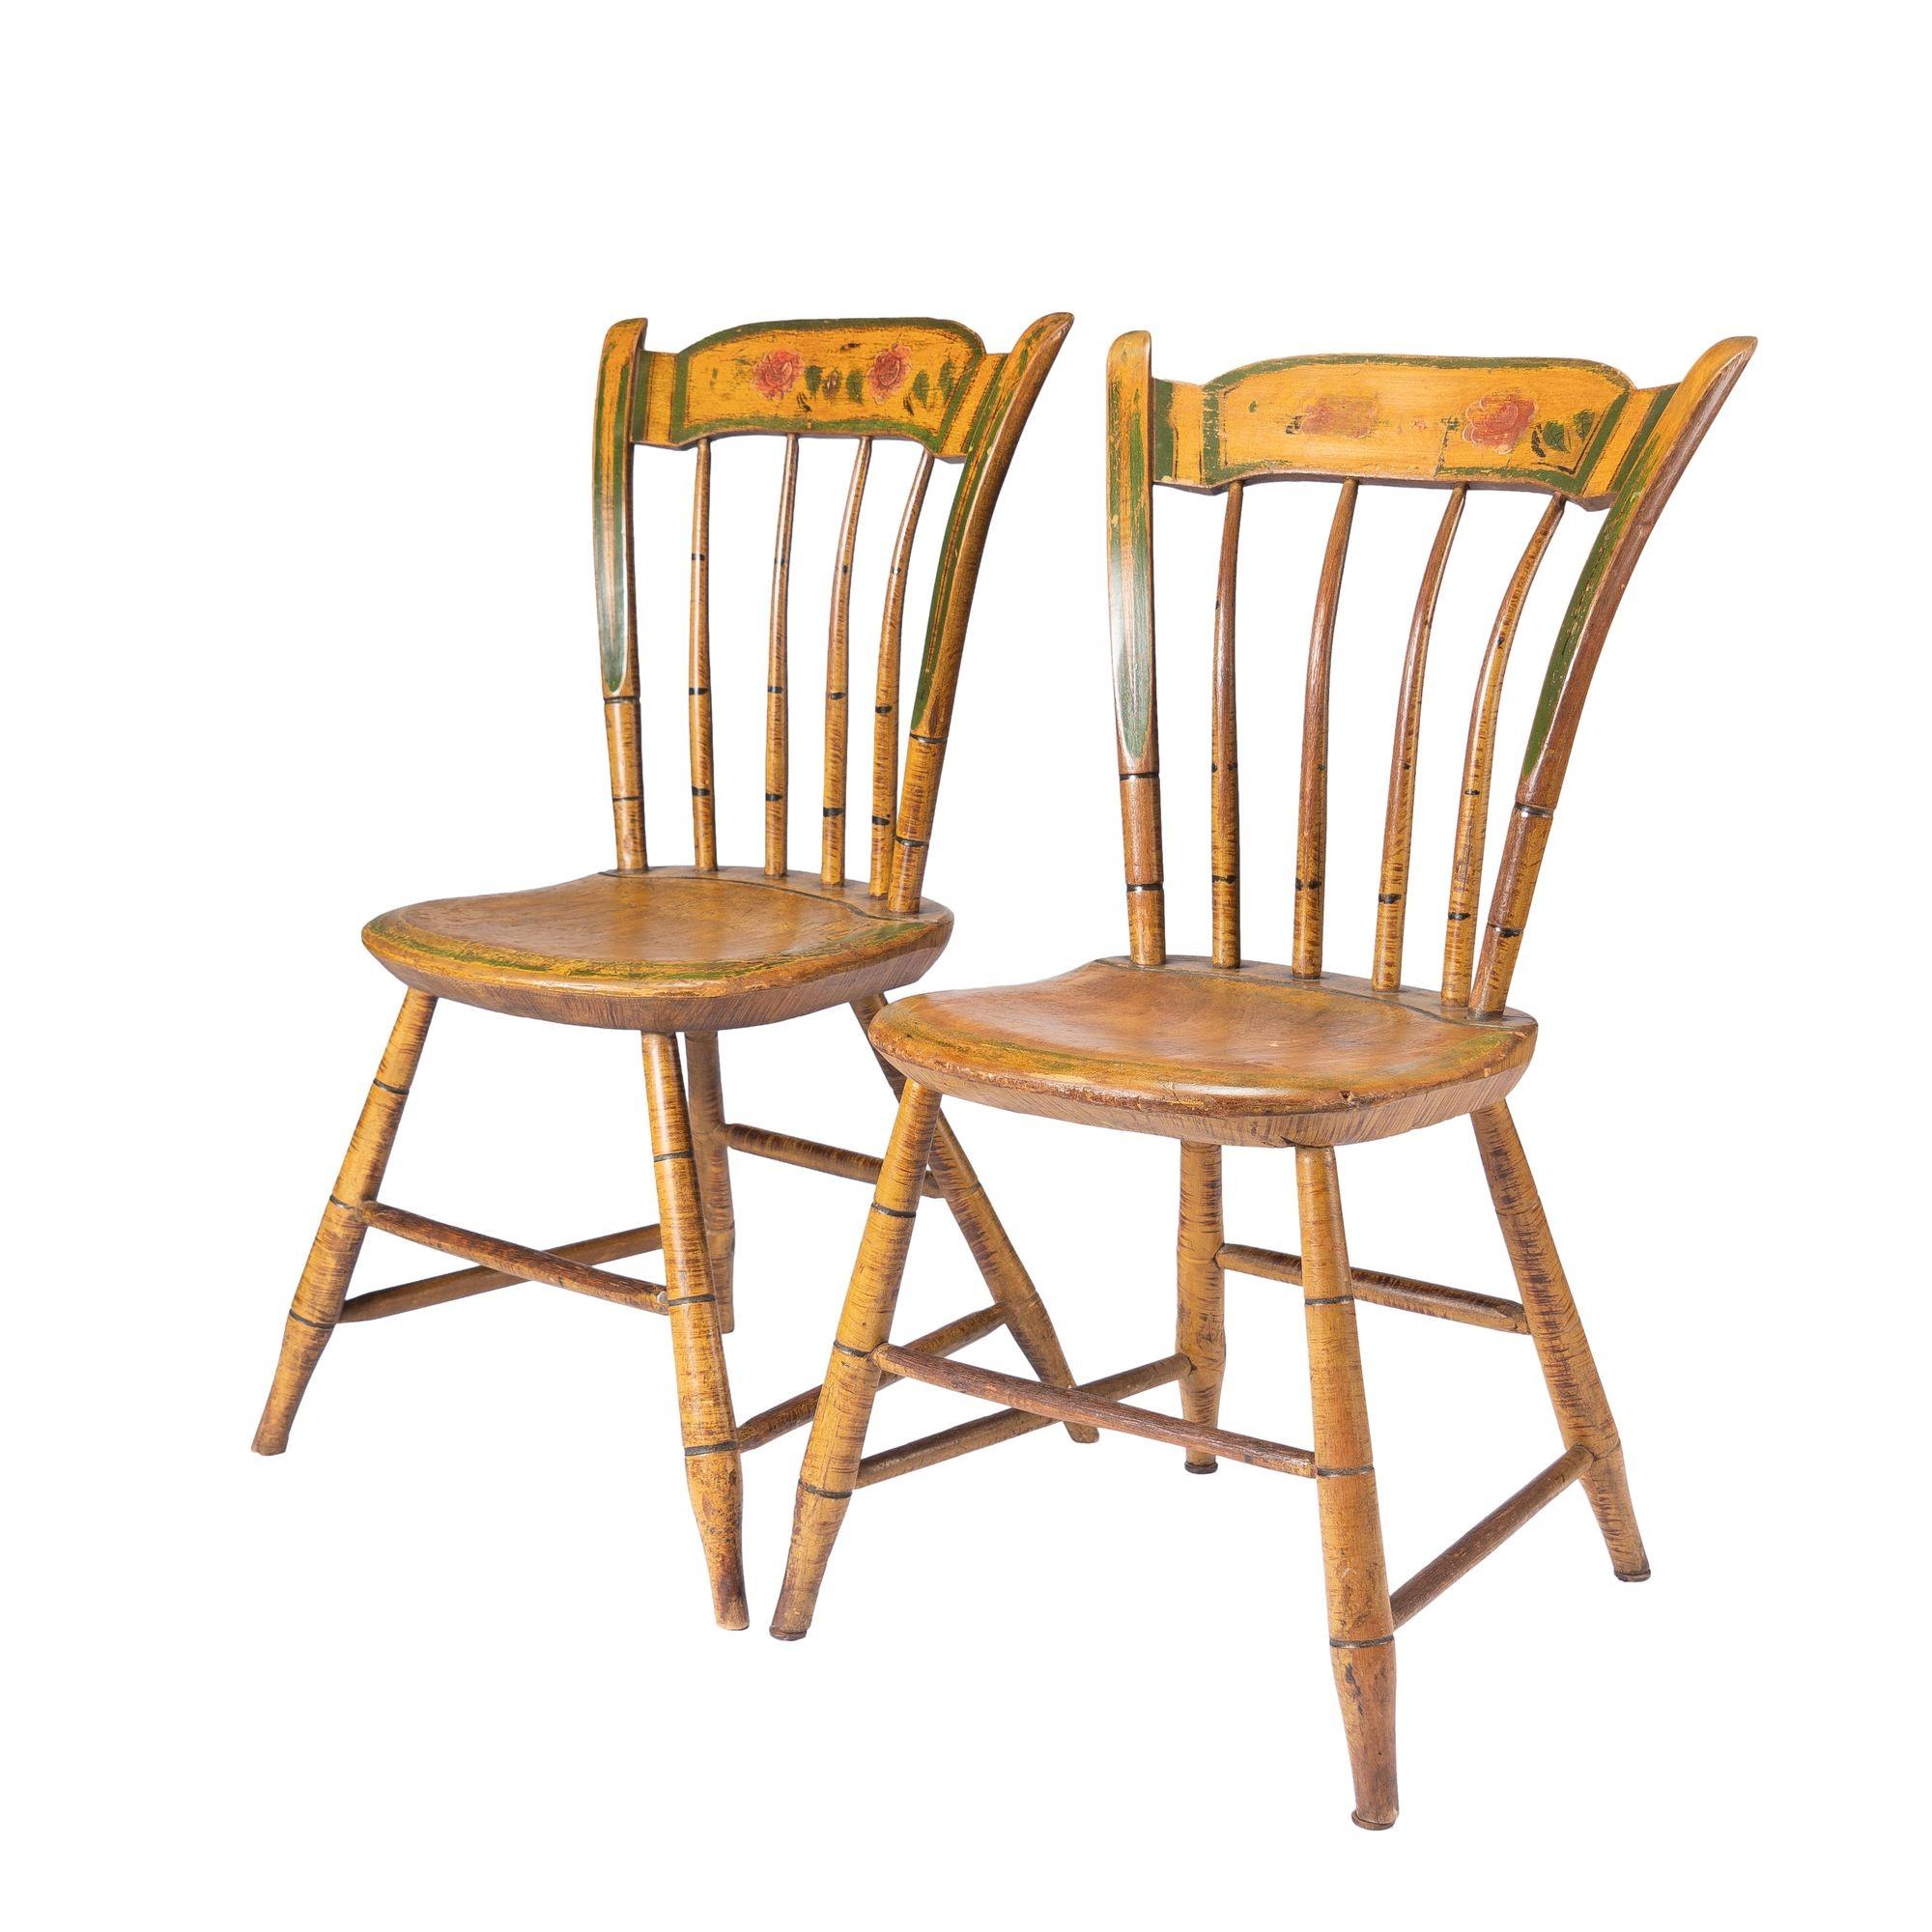 Pair of plank seat Windsor side chairs with thumb backs in their original paint decoration. The chairs are supported on four bamboo turned splayed legs joined by turned boxed stretchers. The spindle back supports a deep crest rail mortice between